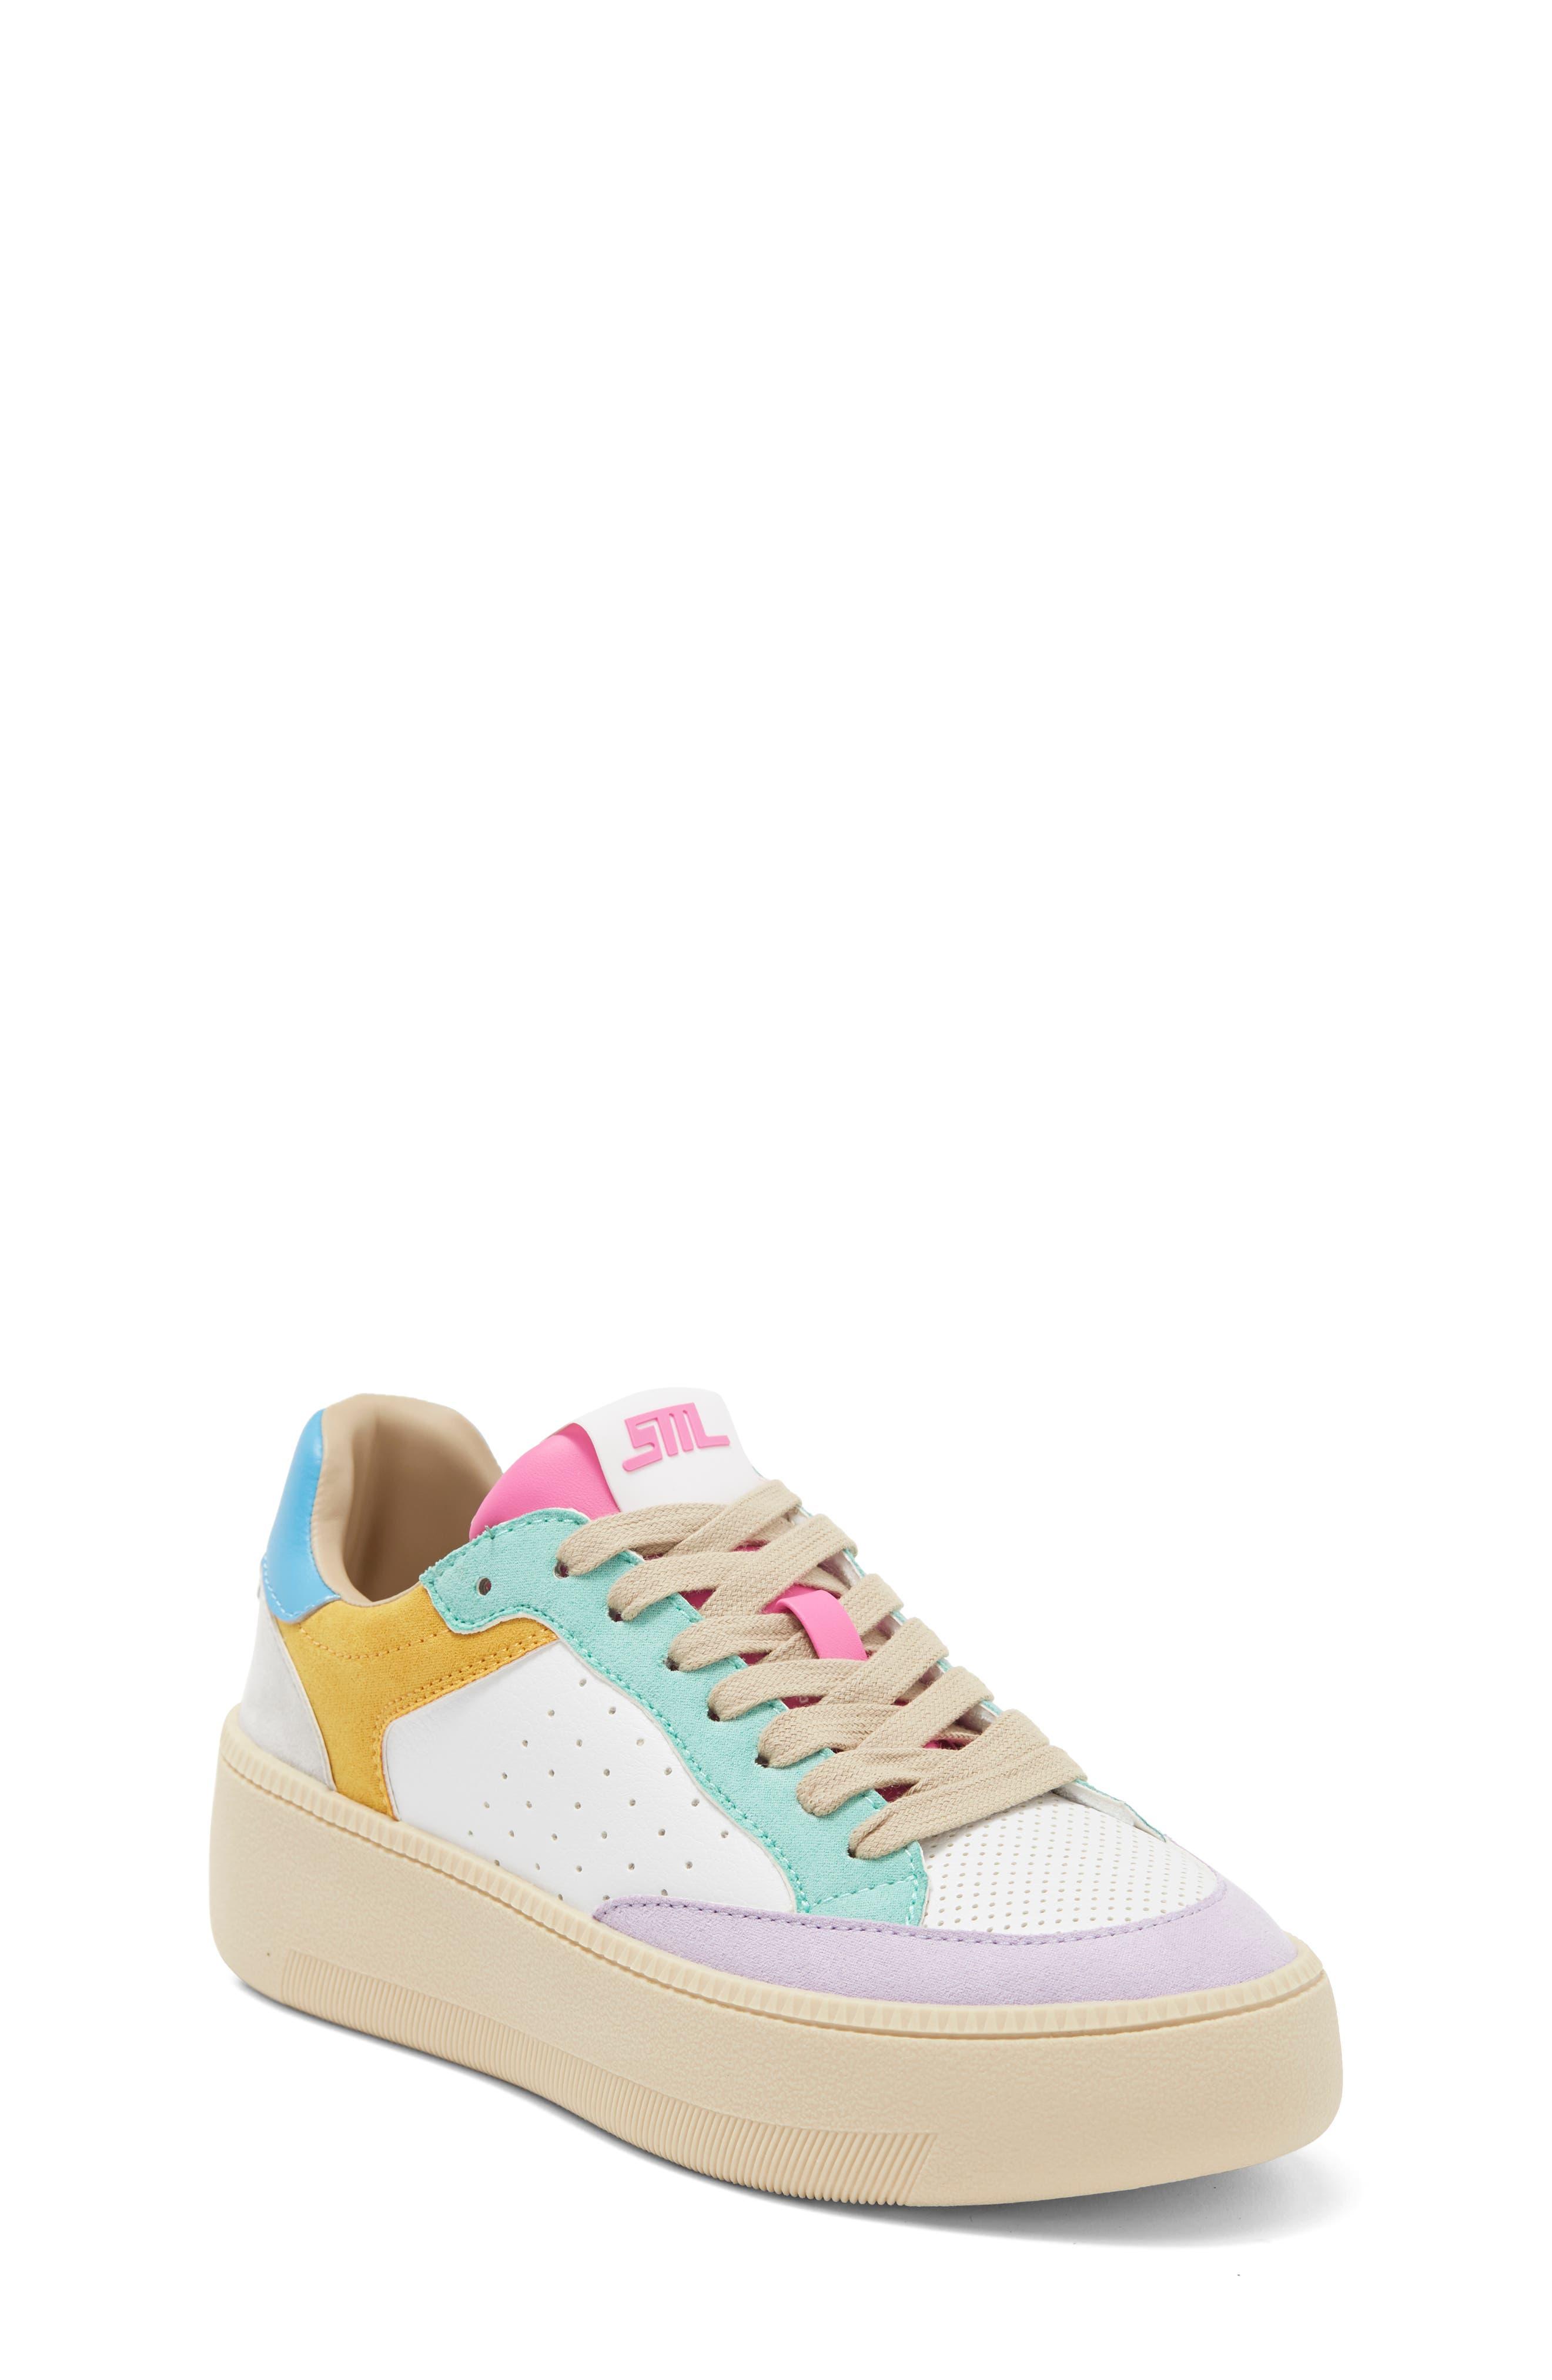 Steve Madden Women's Possession Color Block Lace-Up Sneakers